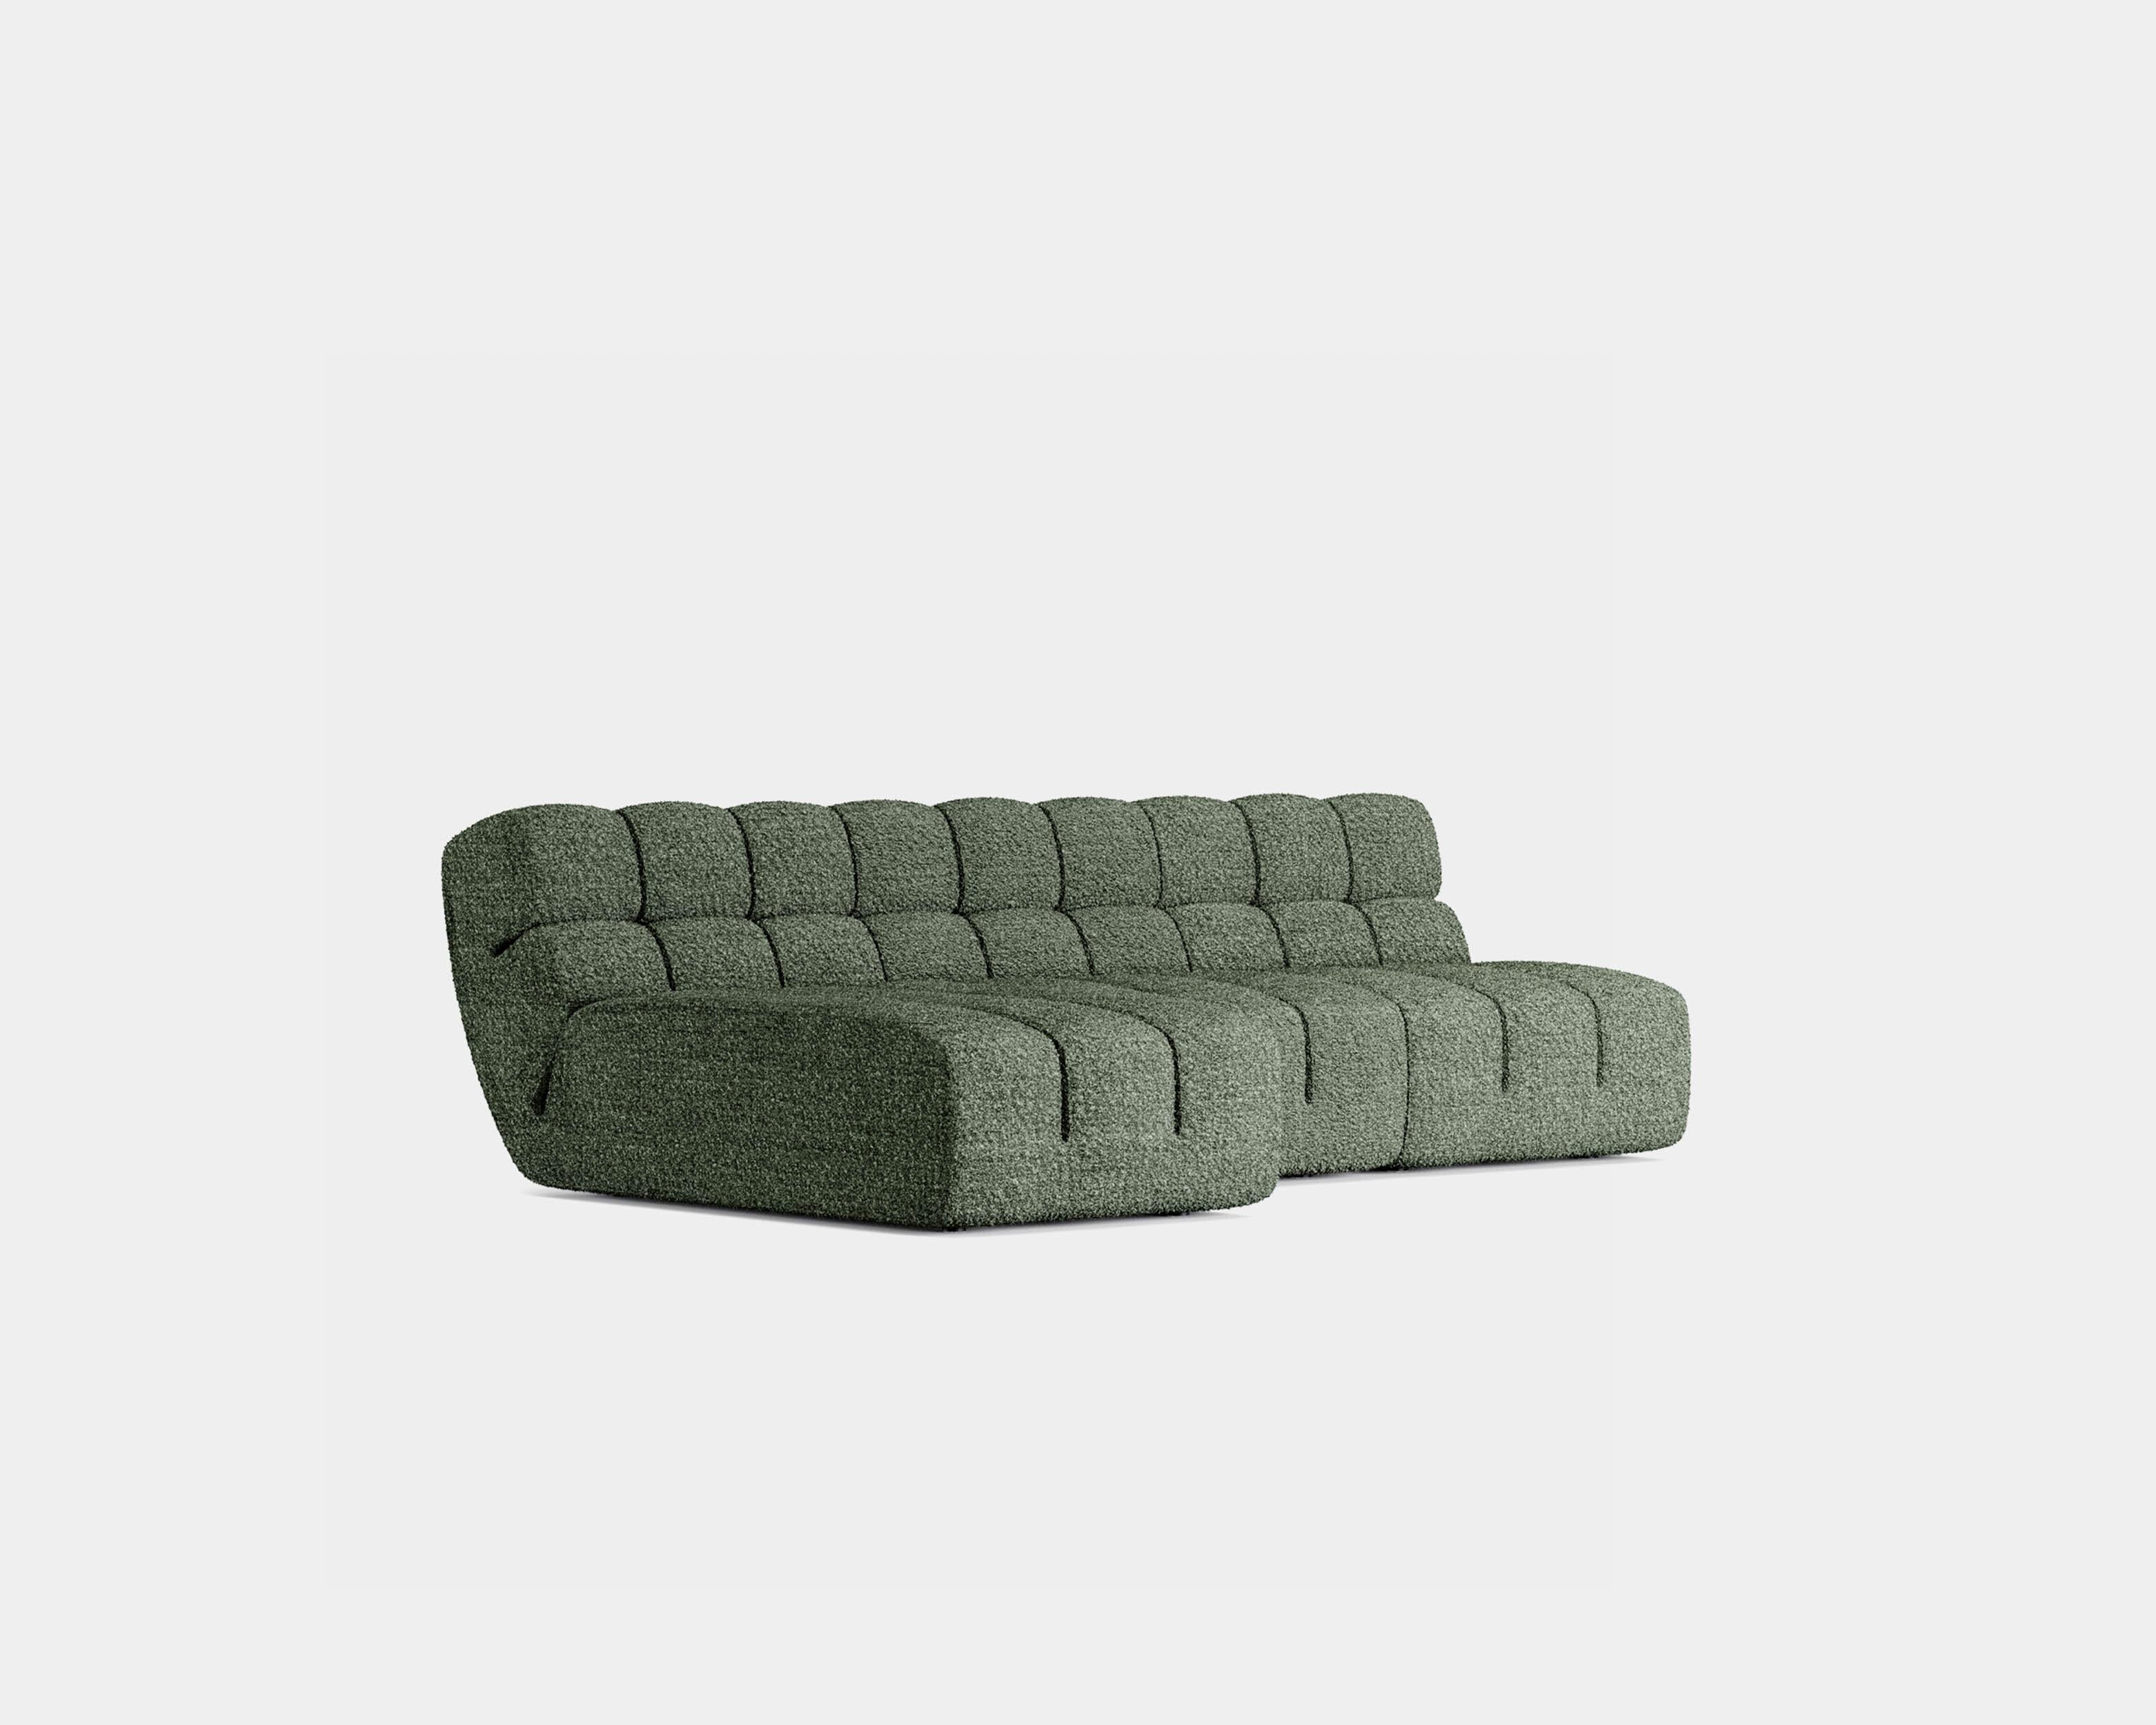 Sectional sofa Palmo by Amura Lab 
Designer: Emanuel Gargano

Model shown: textile - Nimbus N. 9 Loden - Dedar (price can be different for this upholstery)

Inspired by the natural gesture of an opening hand, Palmo is the new living concept designed